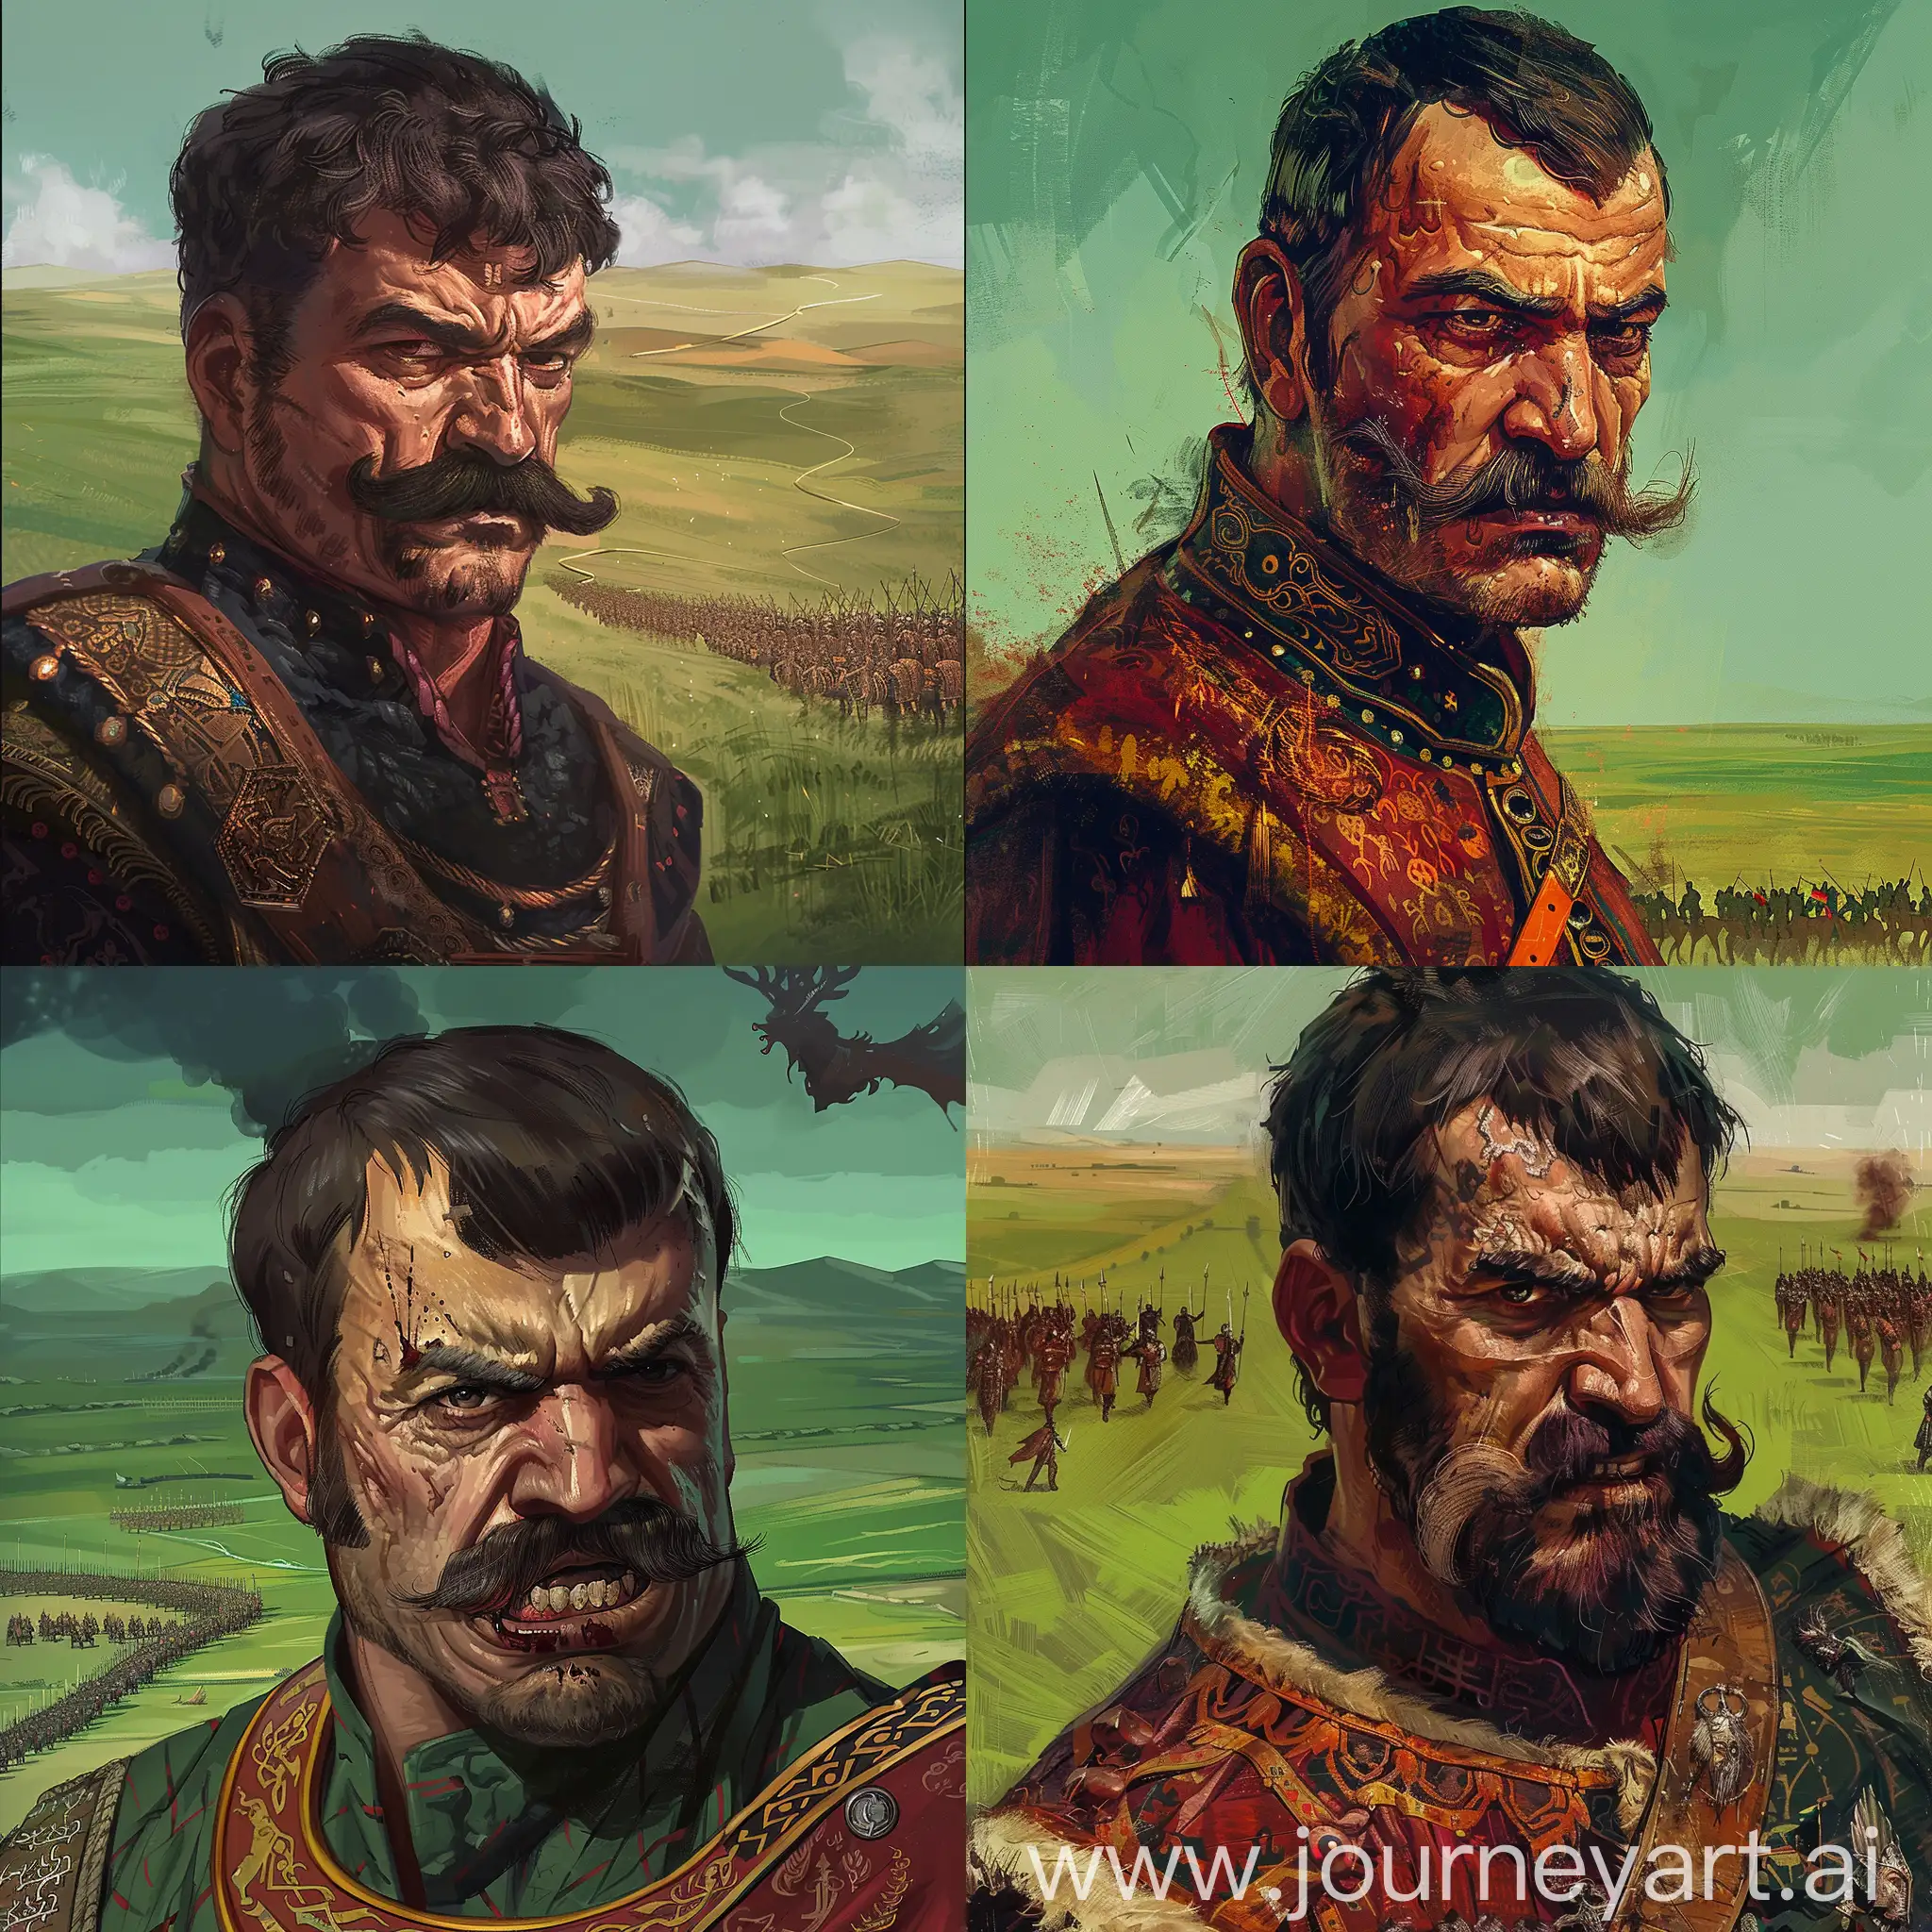 An image of a Qazalbash soldier with a flint mustache and an angry image of Shah Ismail's Safavid army, attention to detail, a green plain background